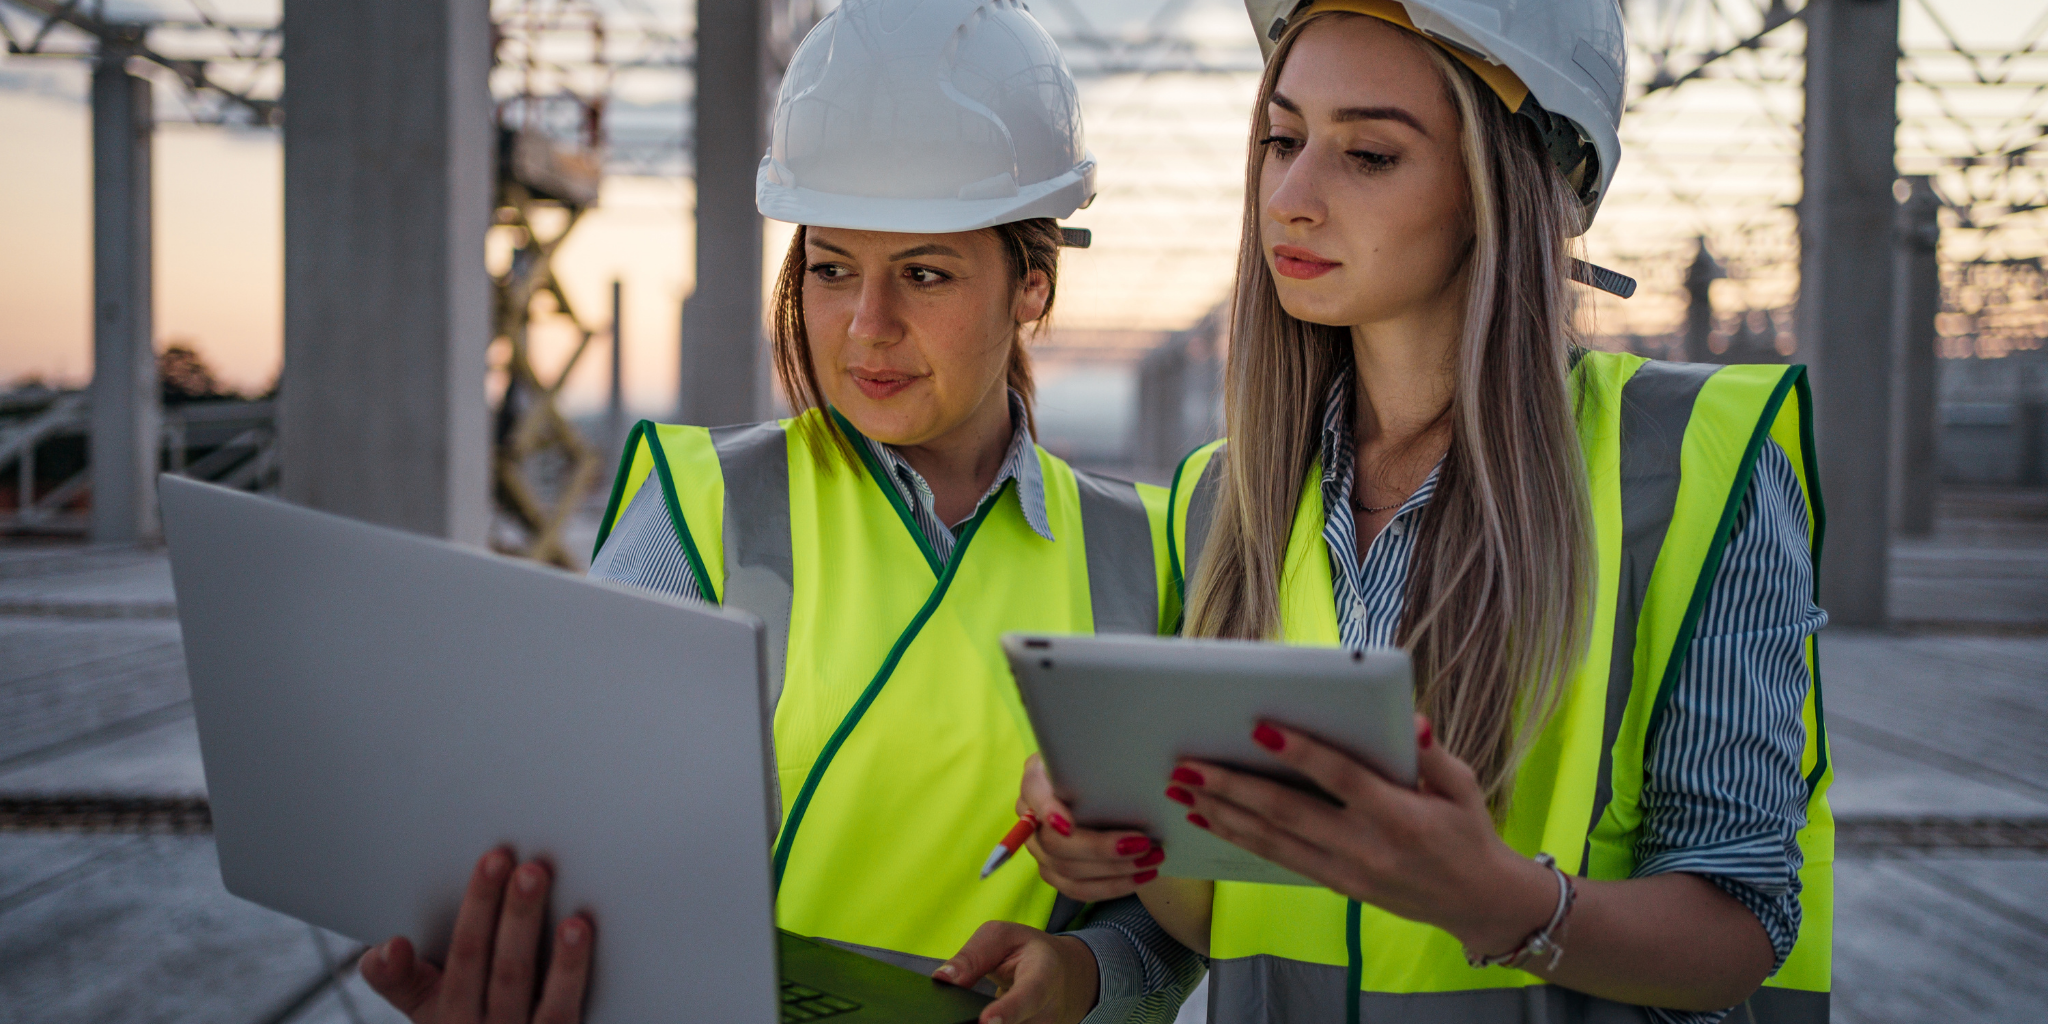 How HS2 is “upskilling the next generation” of female engineers